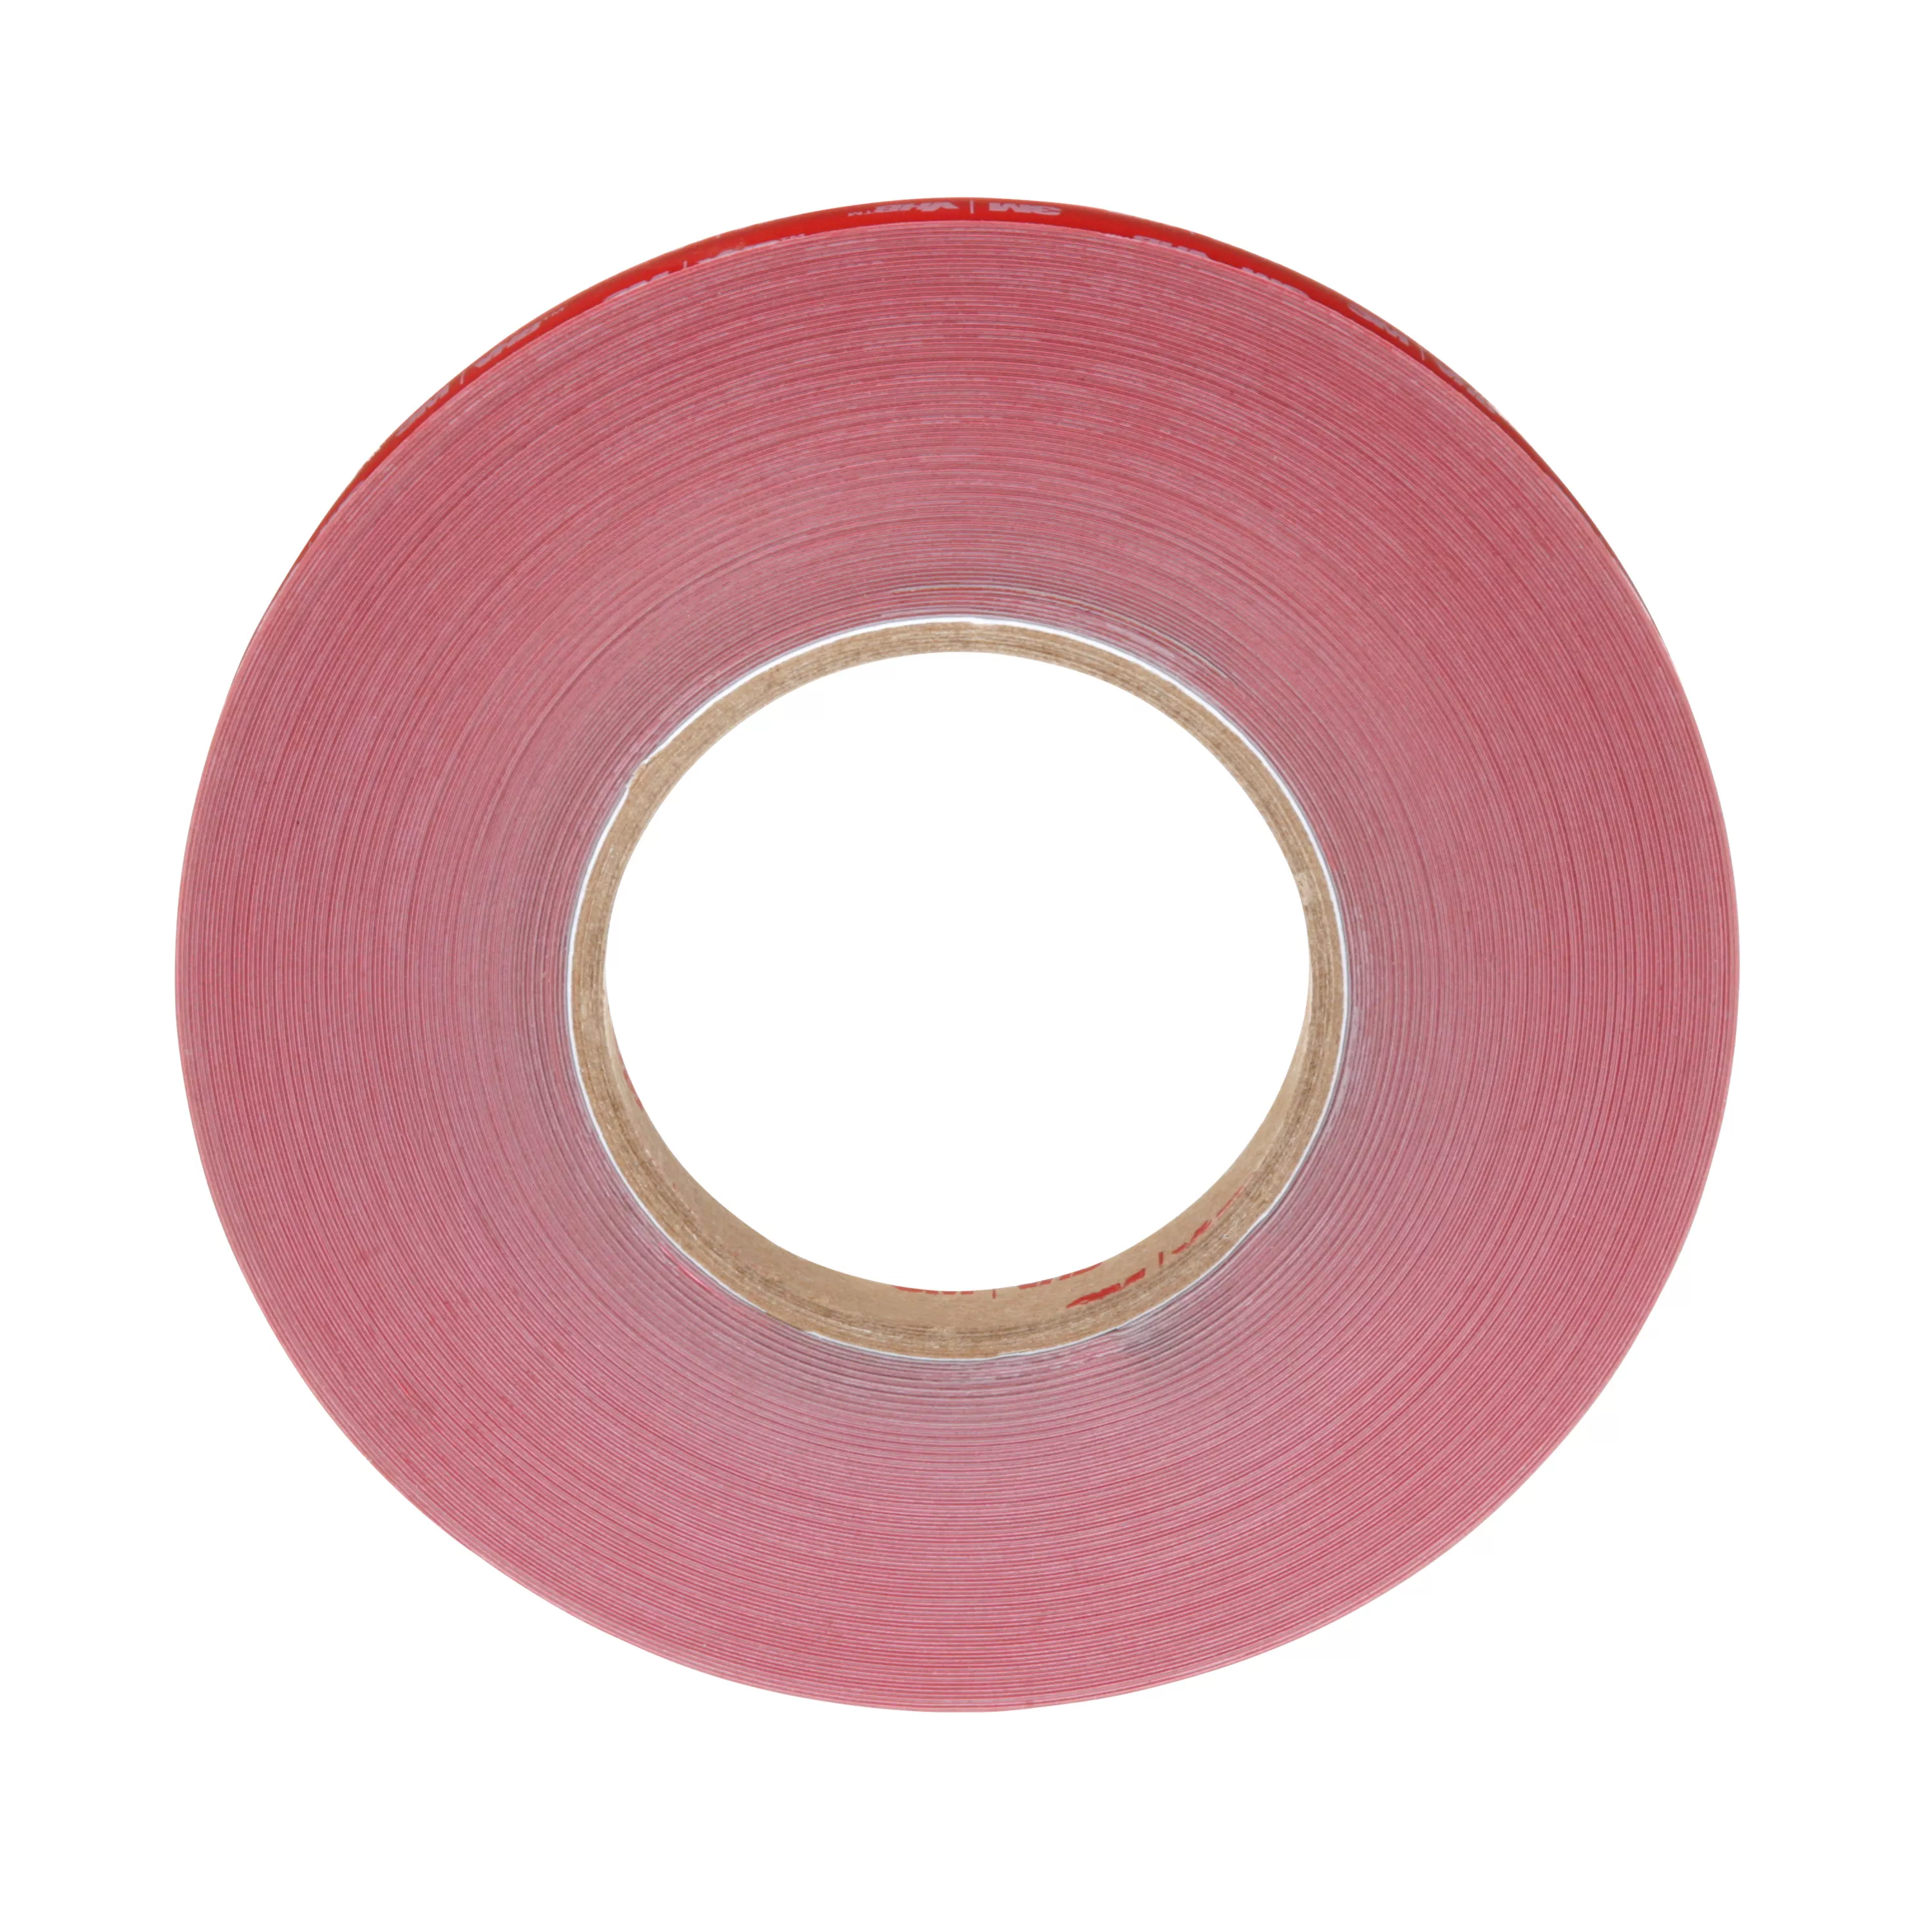 Product Number 4936 | 3M™ VHB™ Tape 4936F